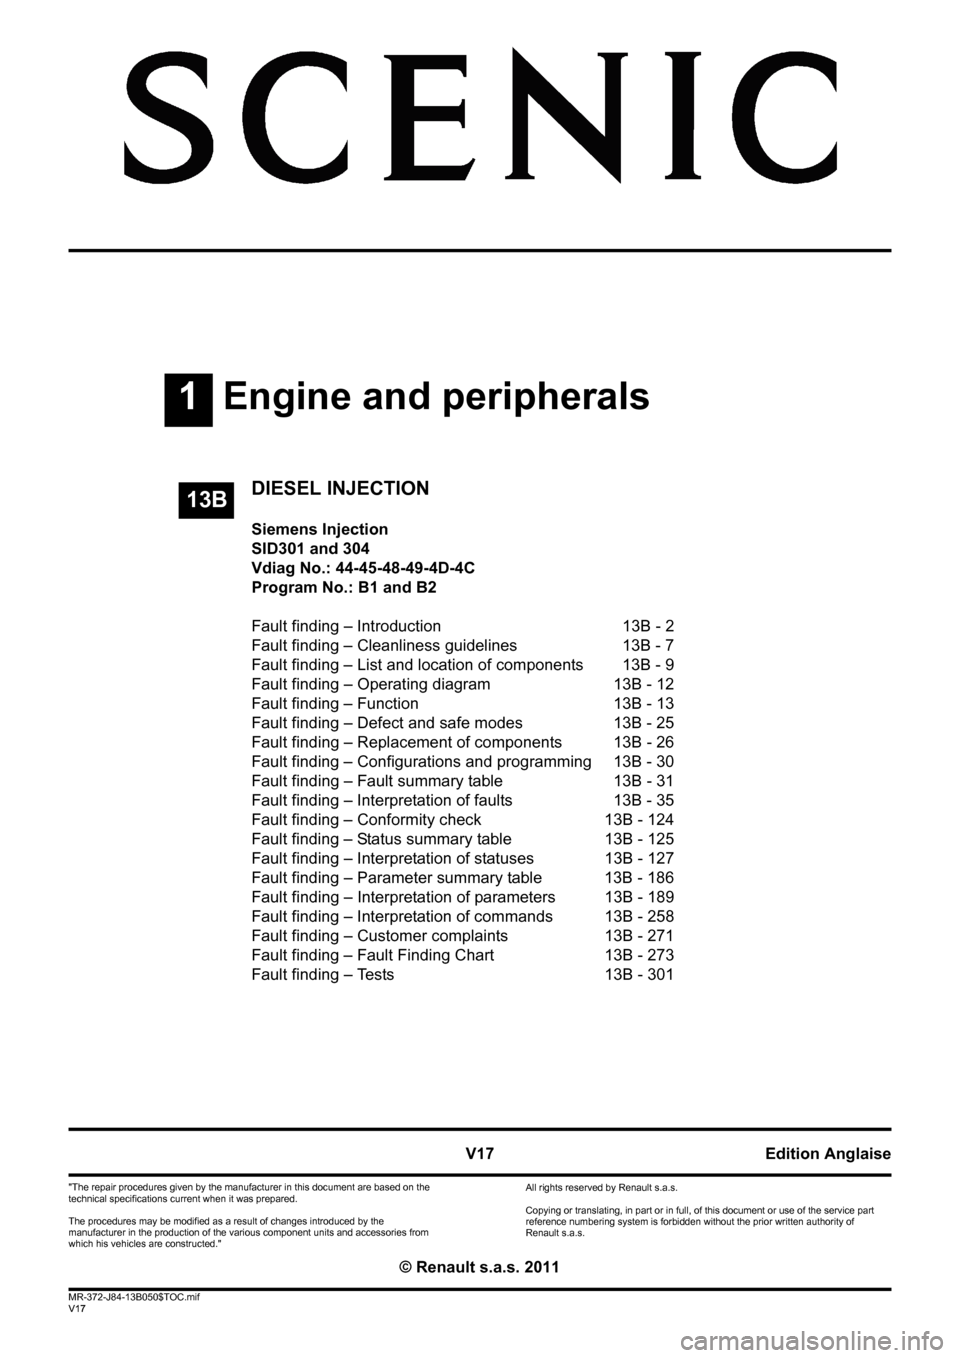 RENAULT SCENIC 2011 J95 / 3.G Engine And Peripherals Siemens Injection Workshop Manual 1Engine and peripherals
V17 MR-372-J84-13B050$TOC.mif
V17
13B
"The repair procedures given by the manufacturer in this document are based on the 
technical specifications current when it was prepared.